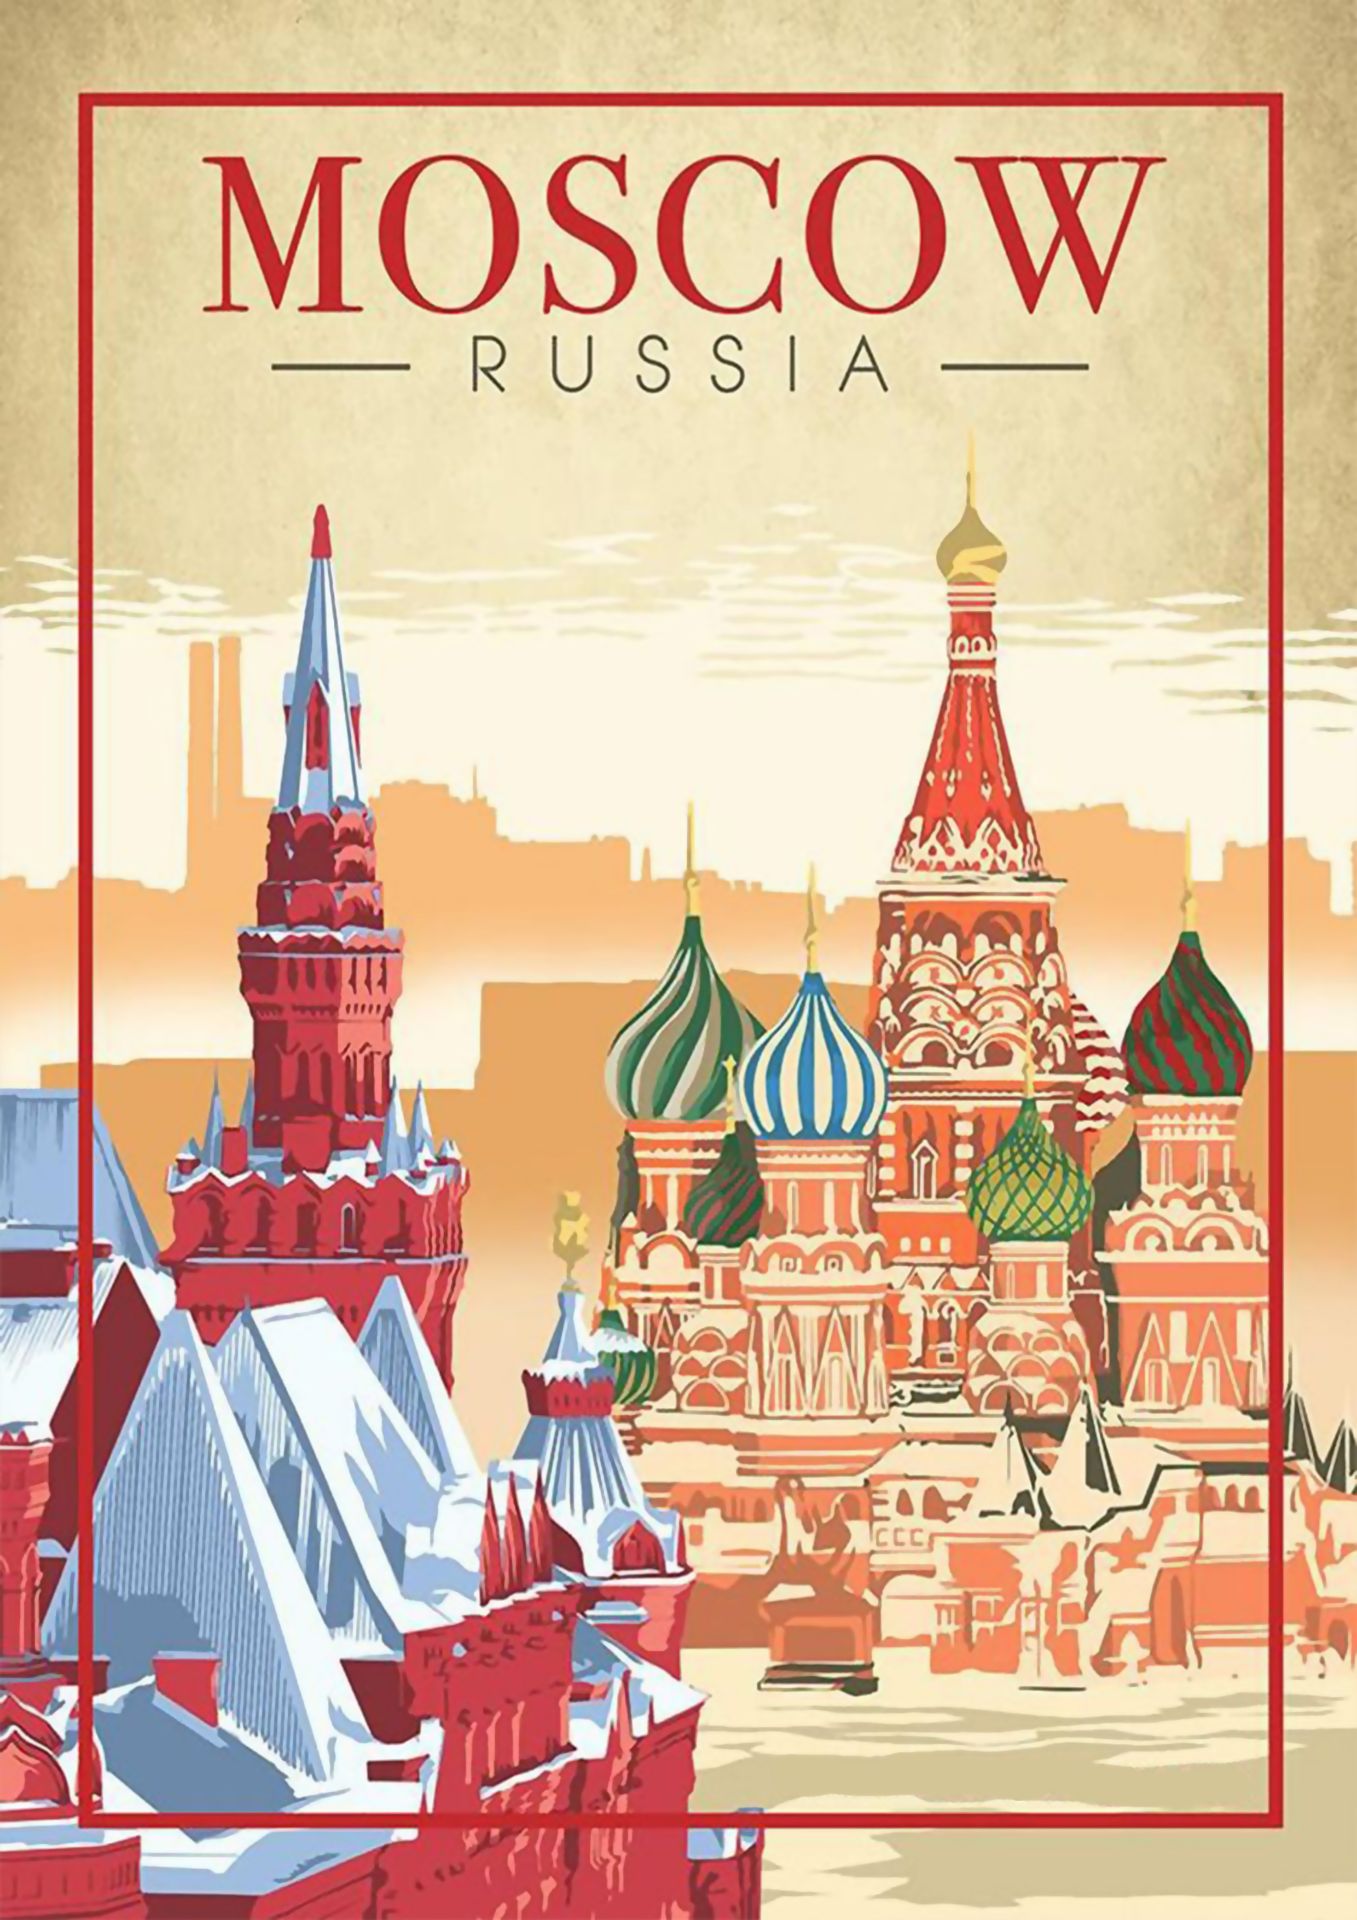 Moscow, Russia Poster